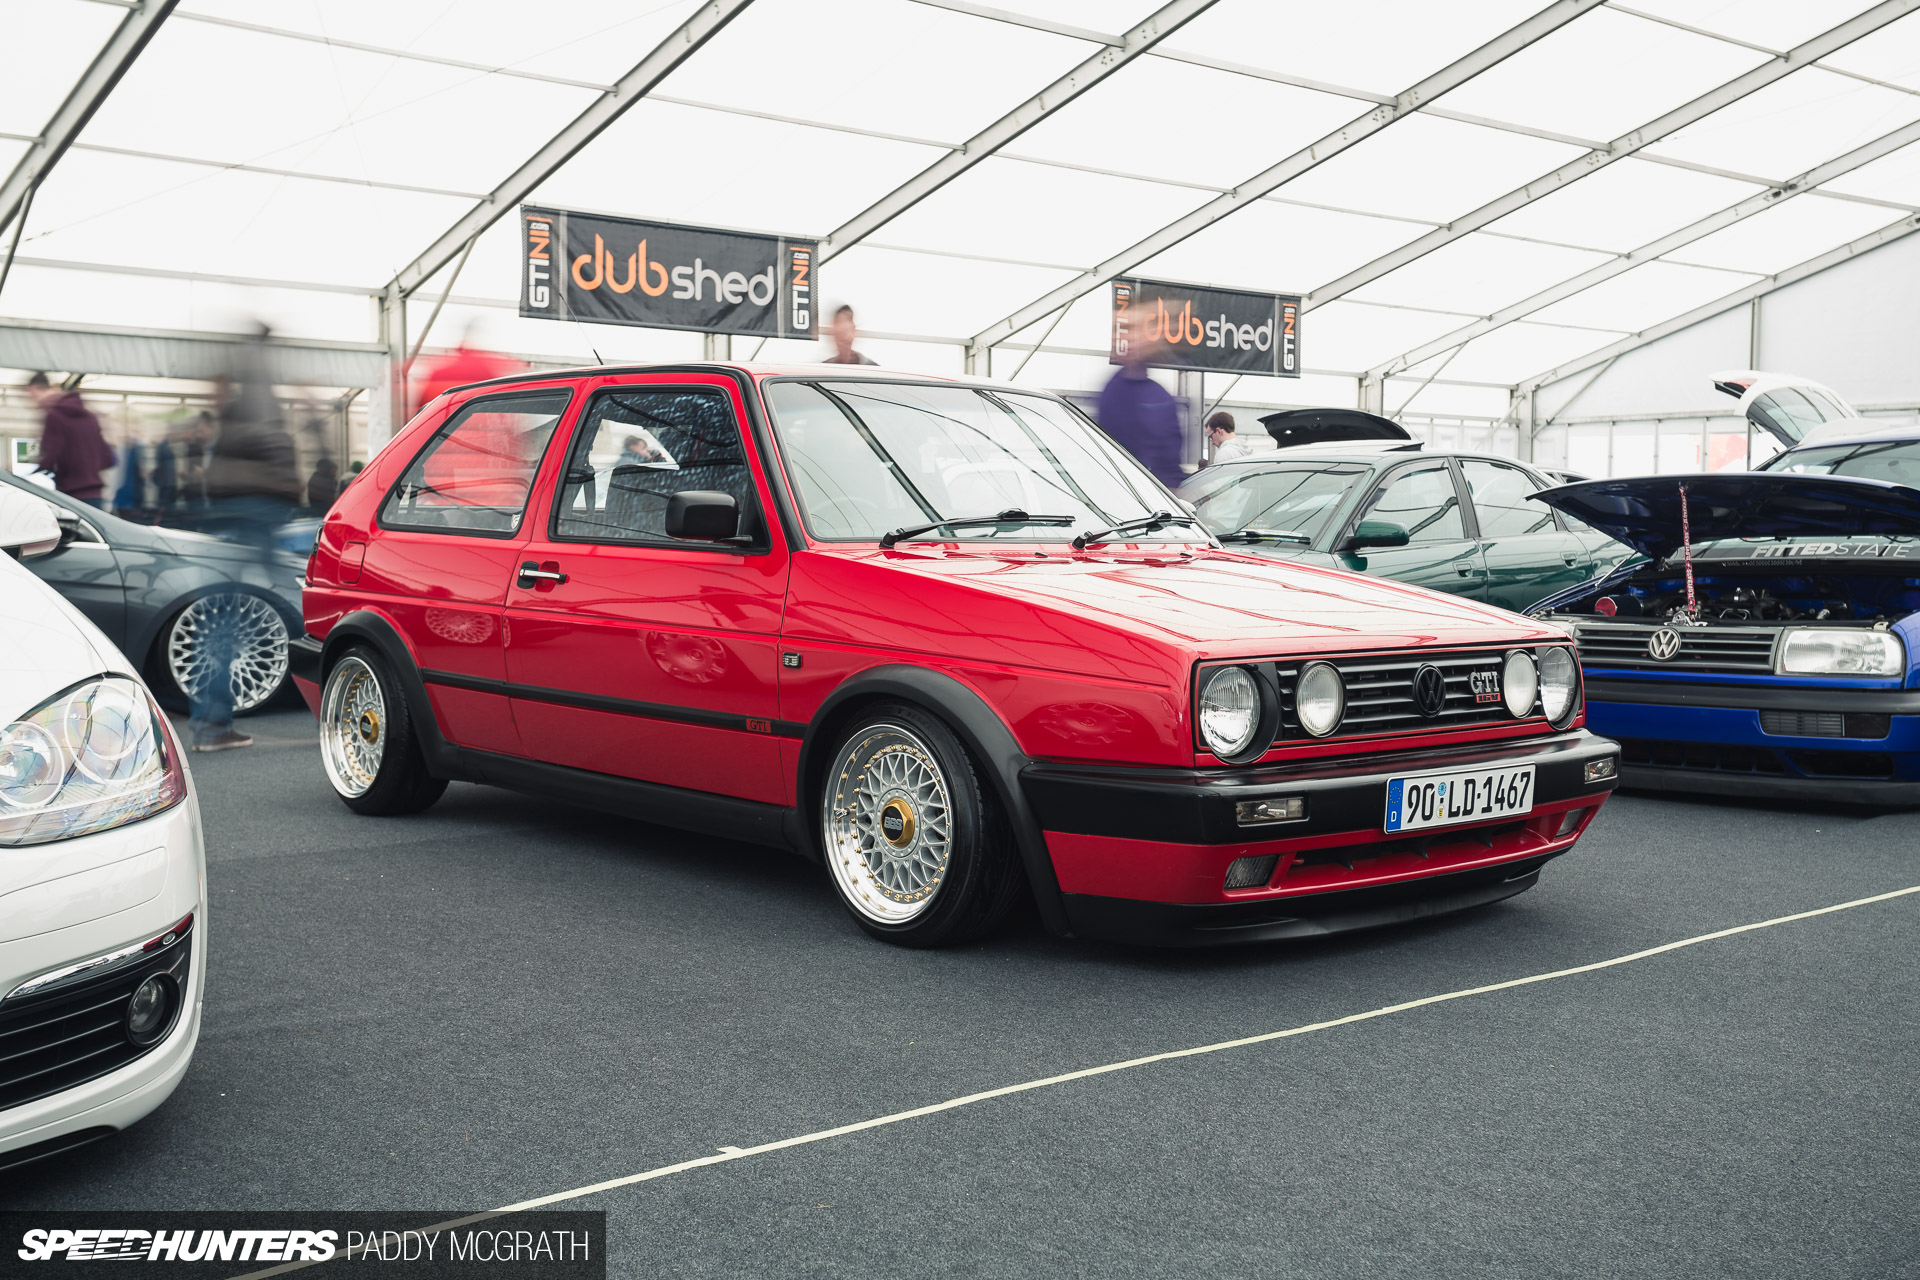 Dubshed: Where Worlds Collide - Speedhunters